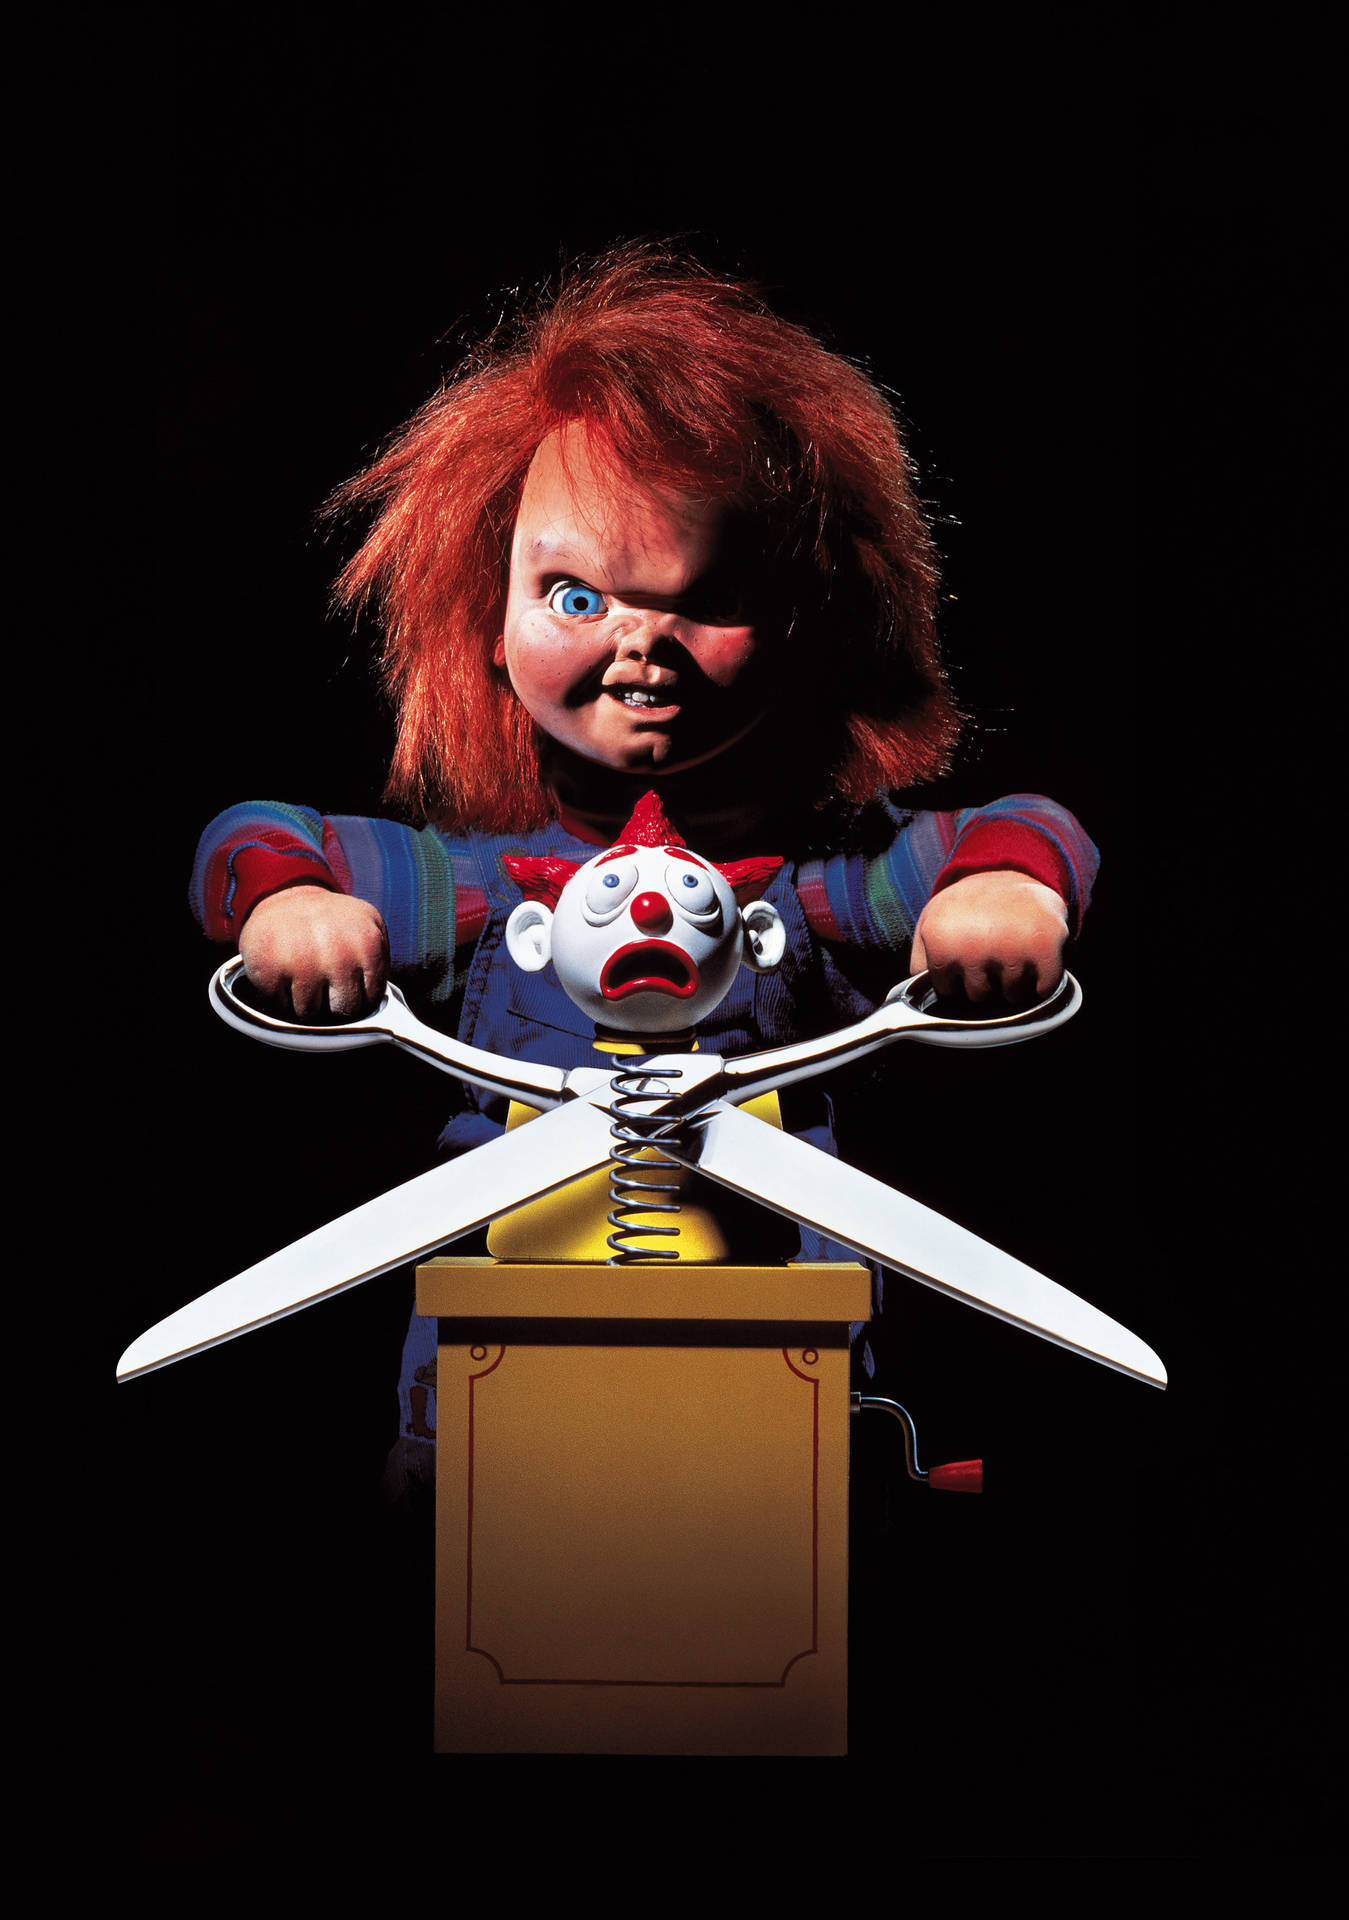 Chucky Child's Play 2 Movie Poster Wallpaper